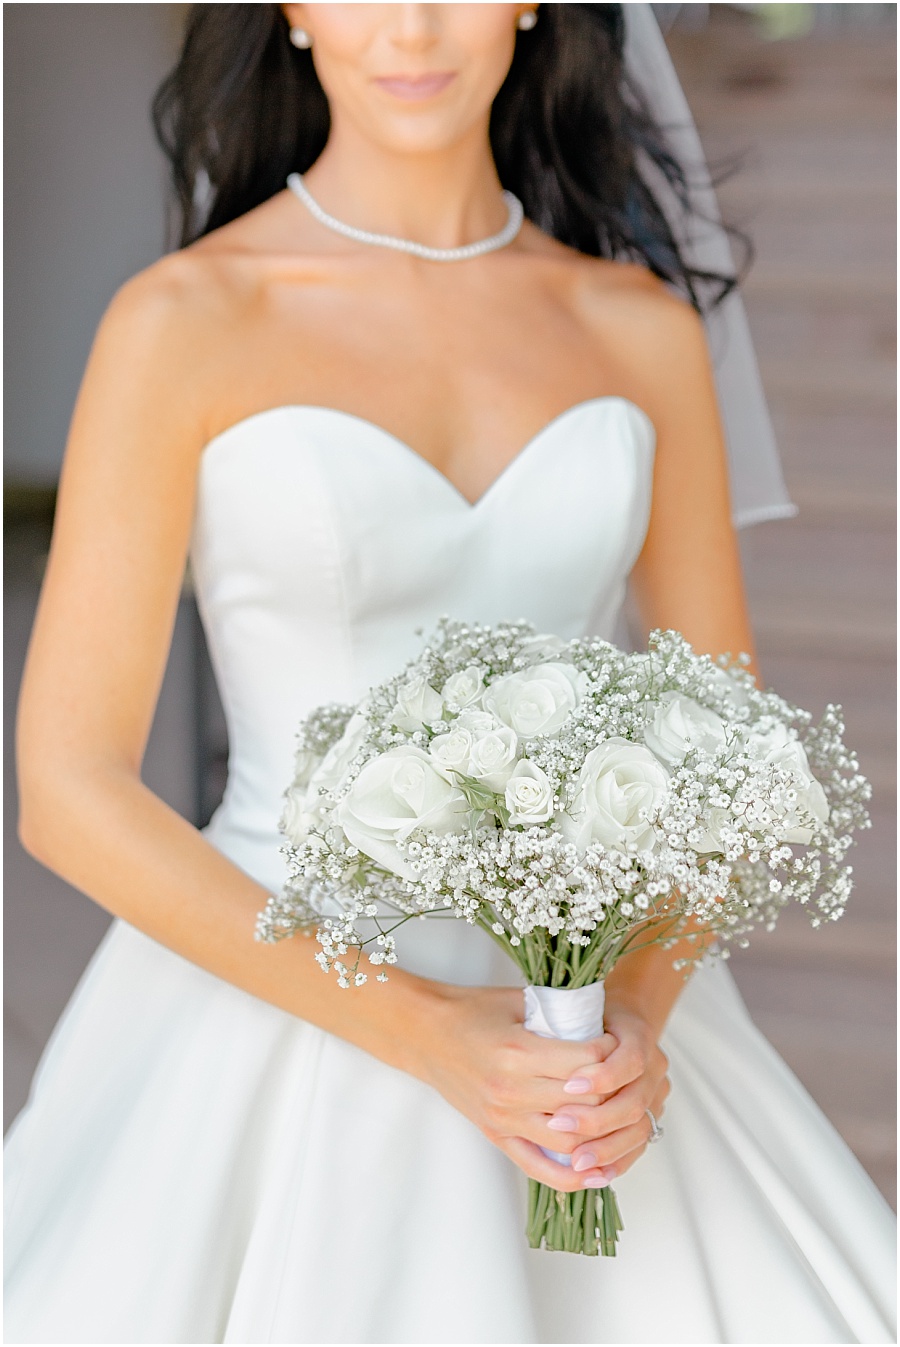 brides plain white roses and baby breaths bouquet by jardiniere fine flowers